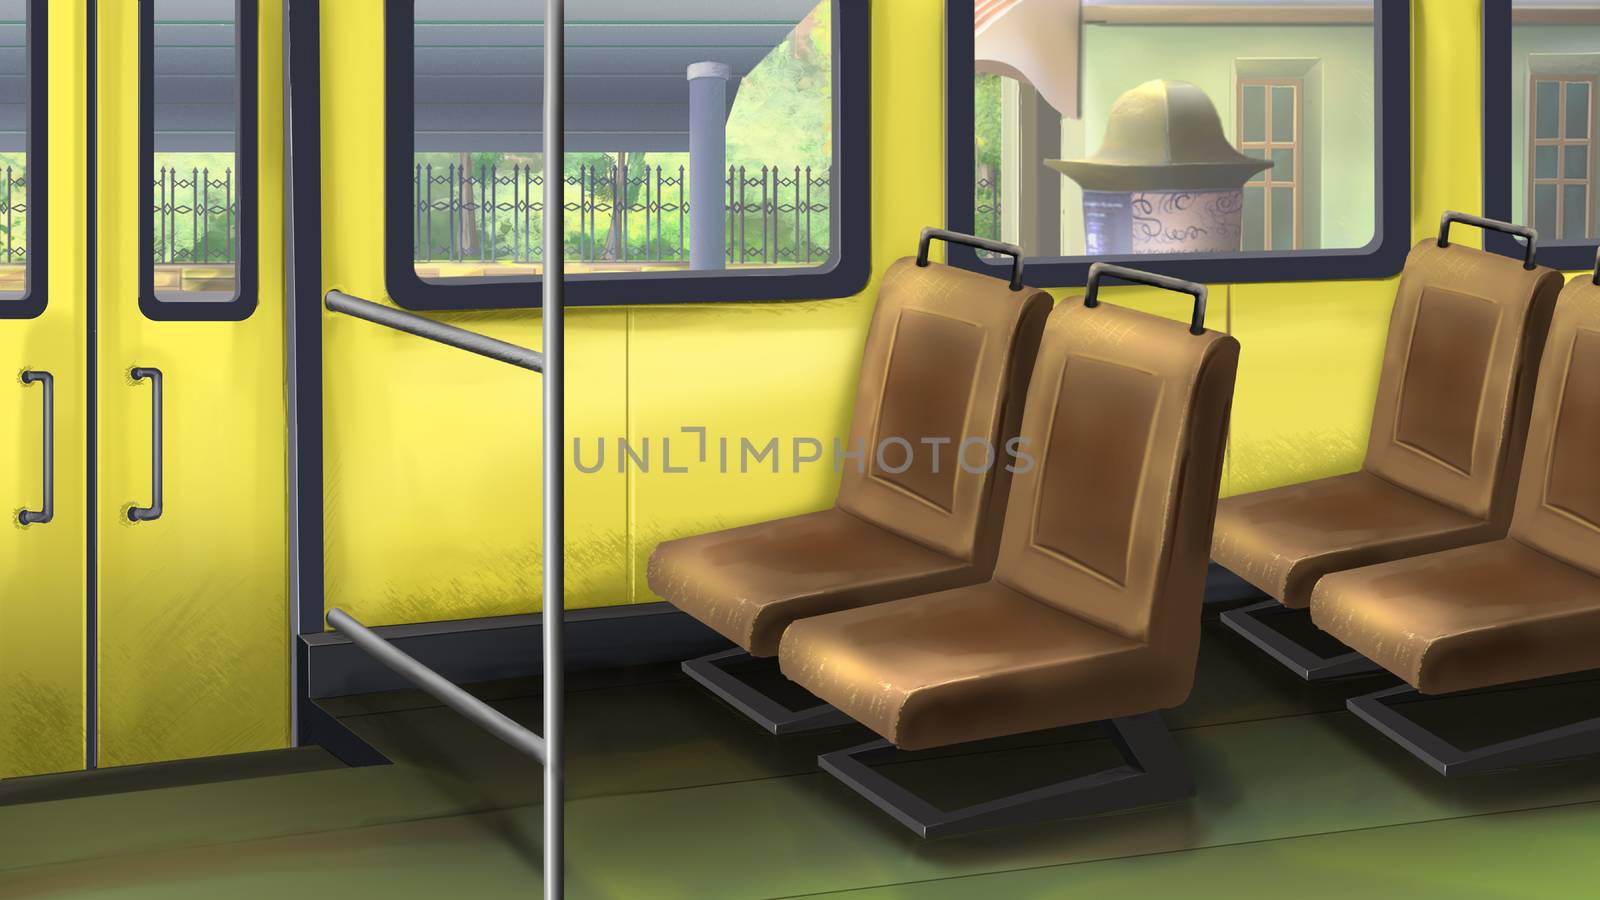 Digital painting of the bus interior.